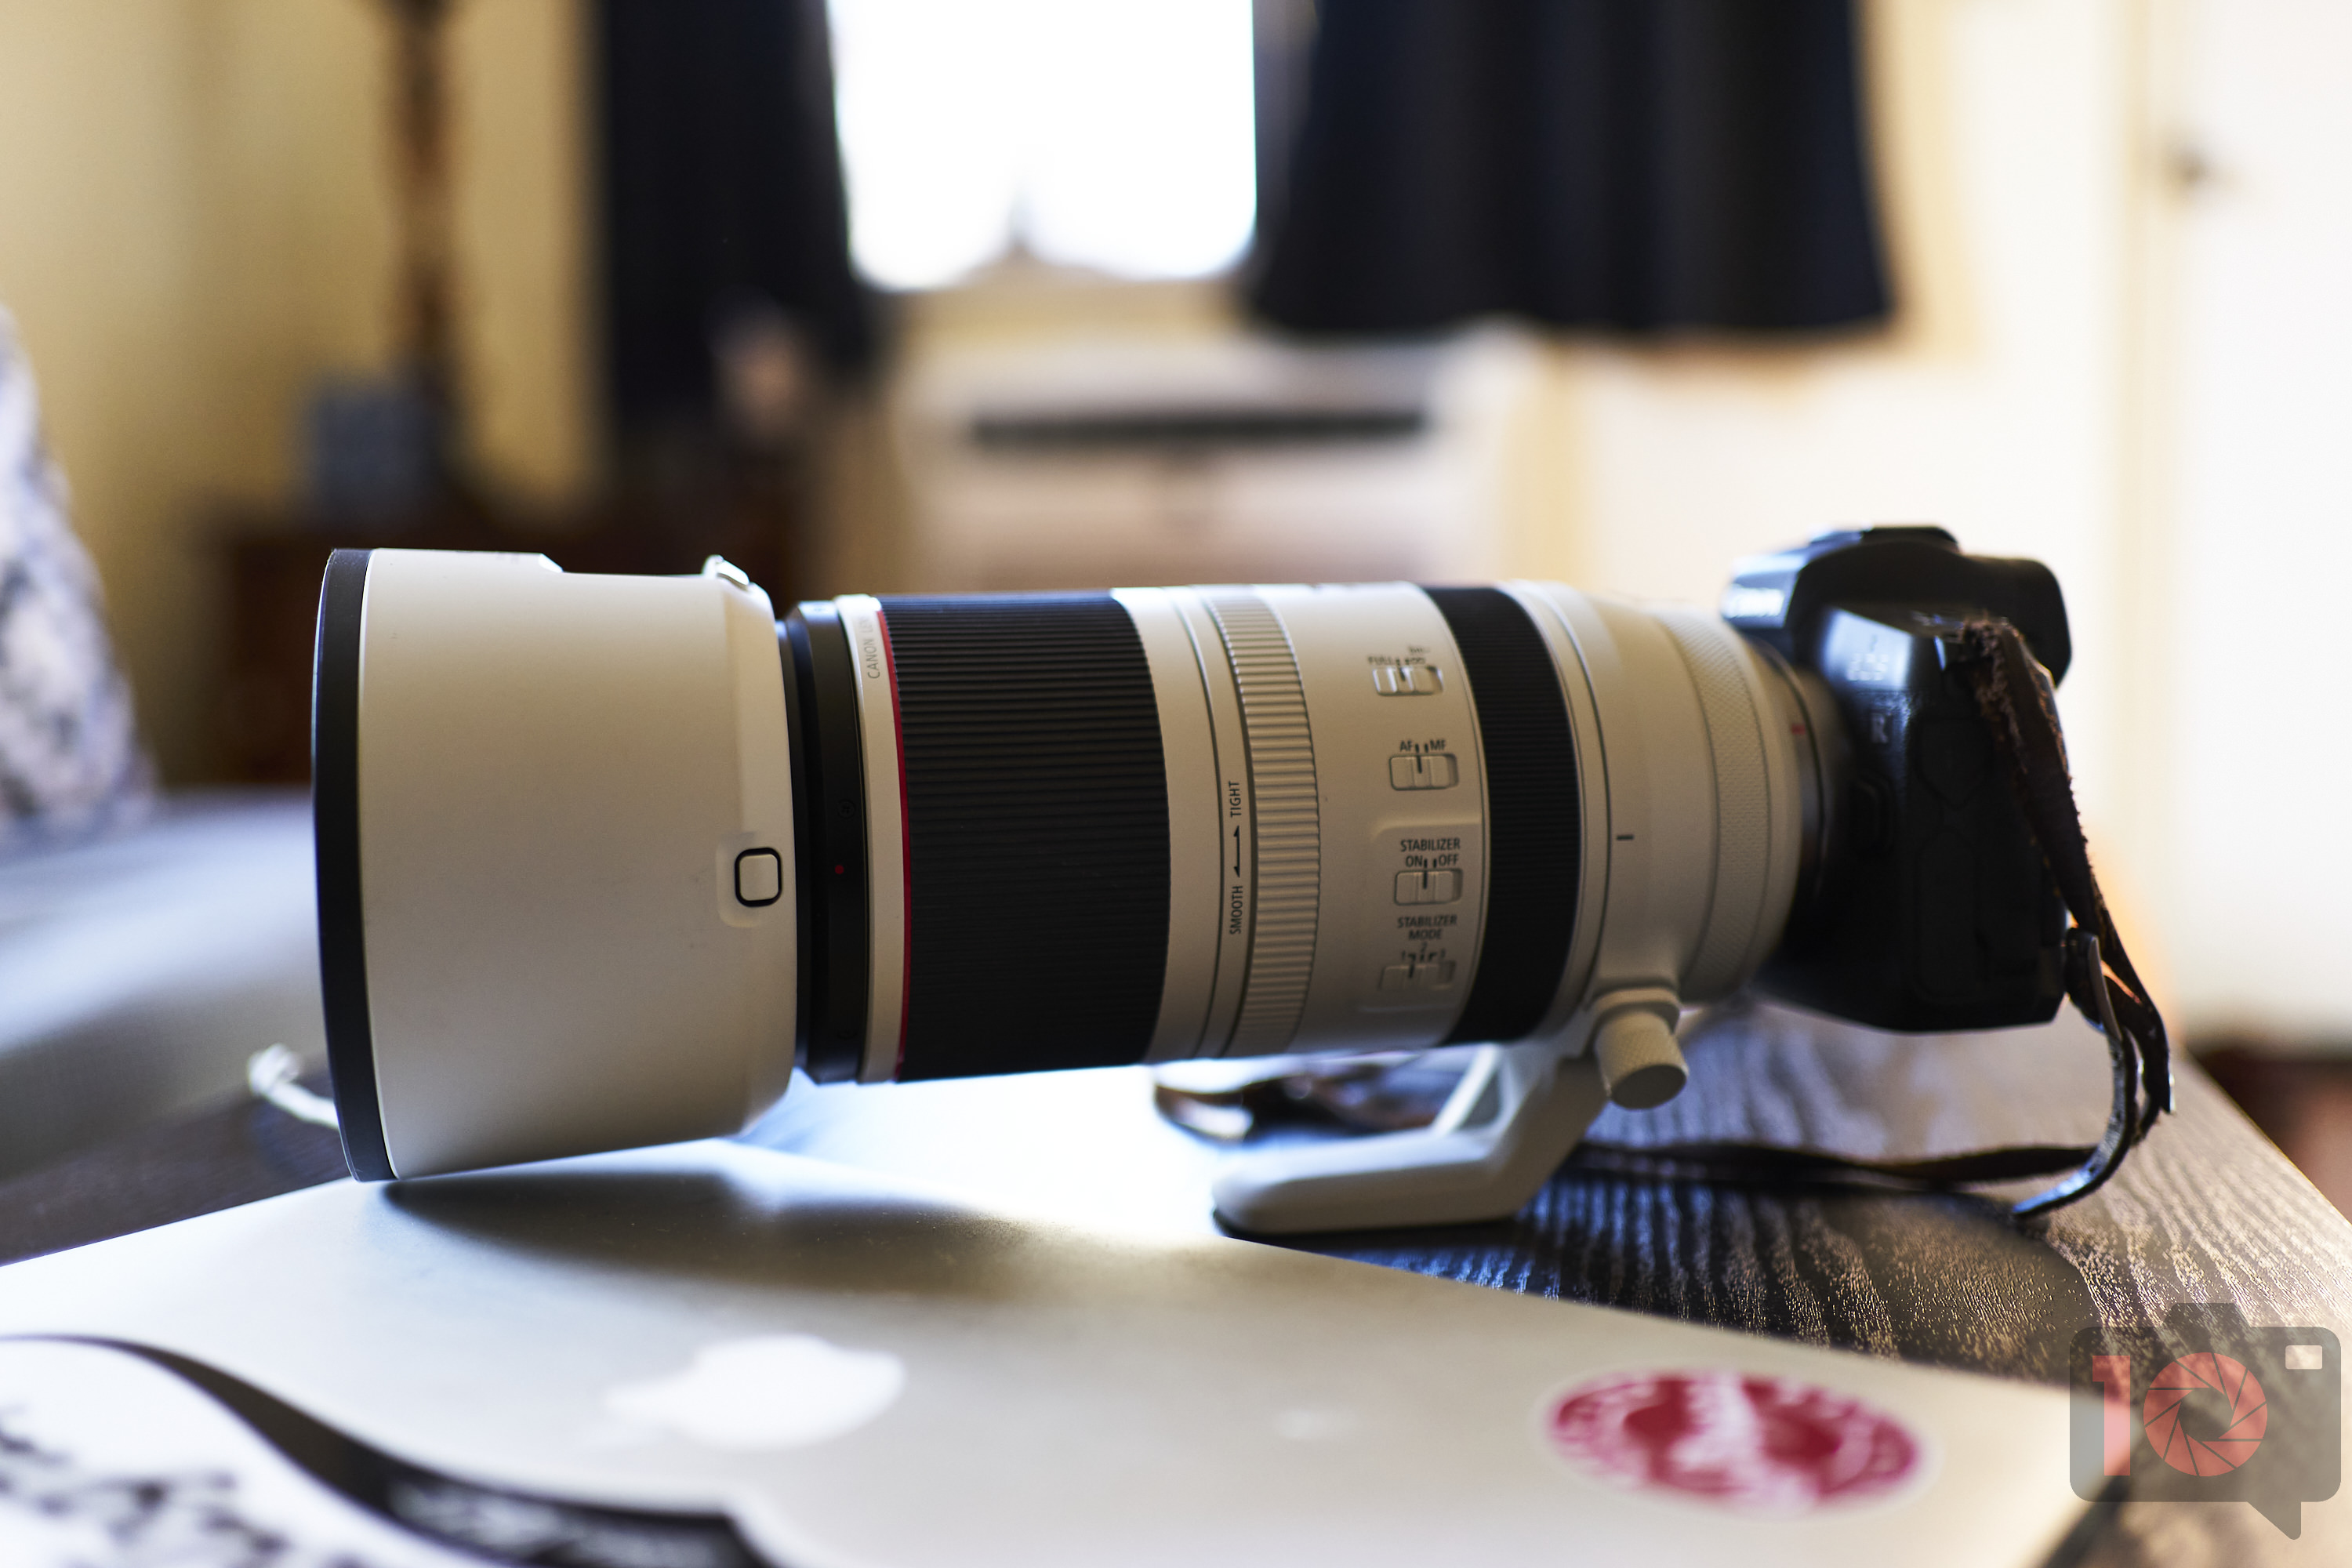 Chris Gampat The Phoblographer Canon RF 100-500mm 4.5-7.1L IS USM Review product images 1.81-250s400 2